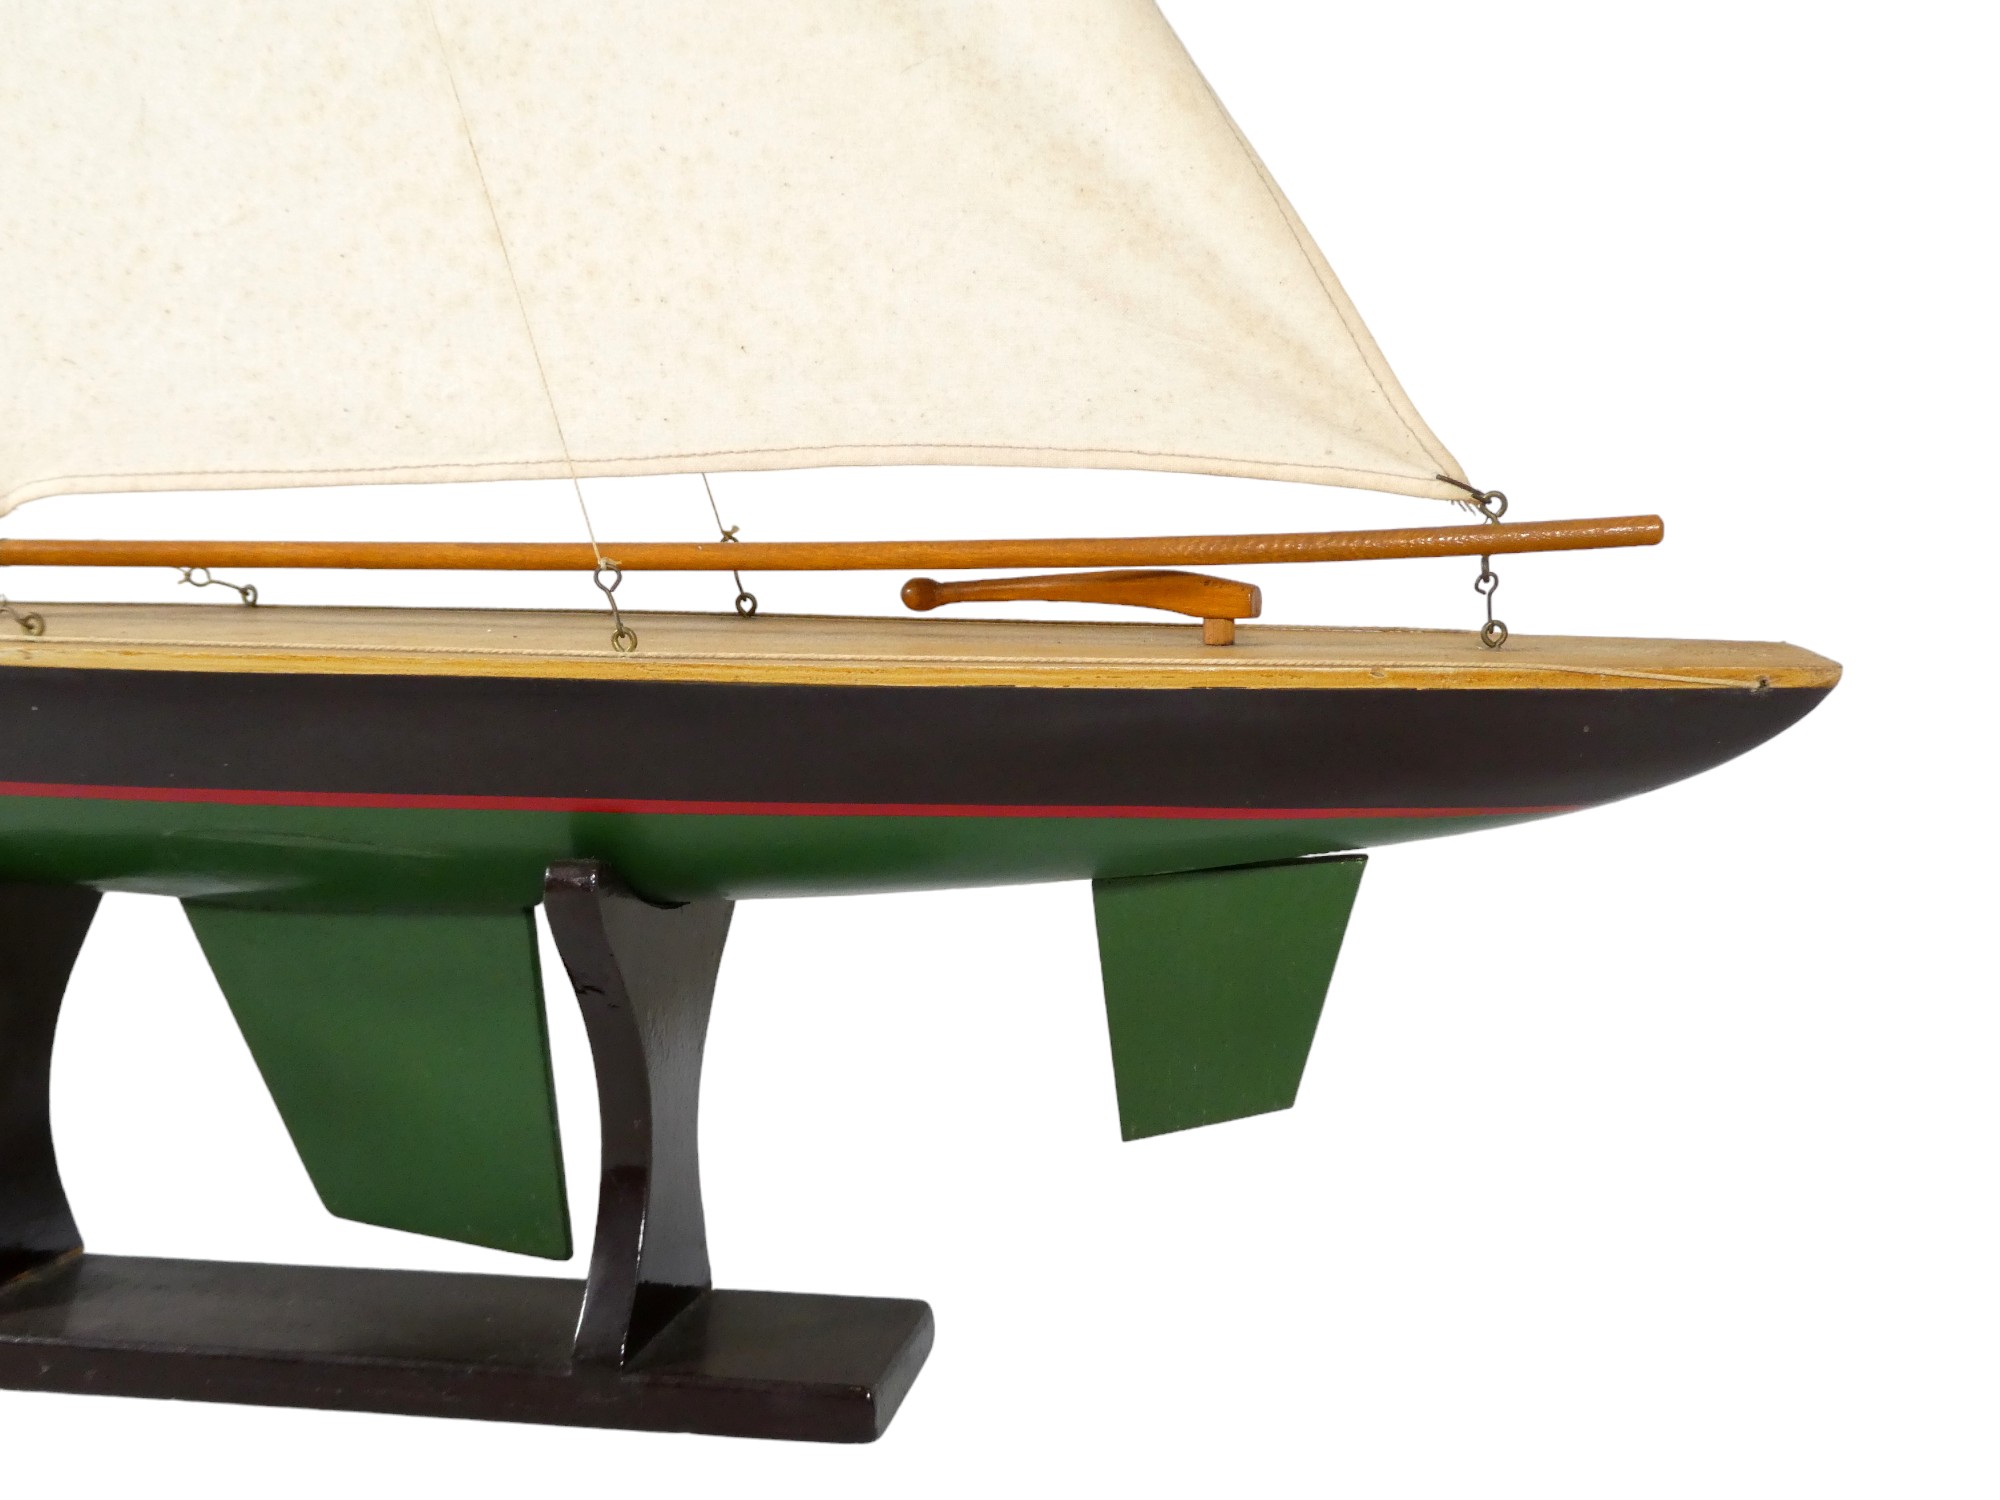 A 20th century pond yacht - Bermuda rig, with black hull, red boot line and green hull, height - Image 3 of 4